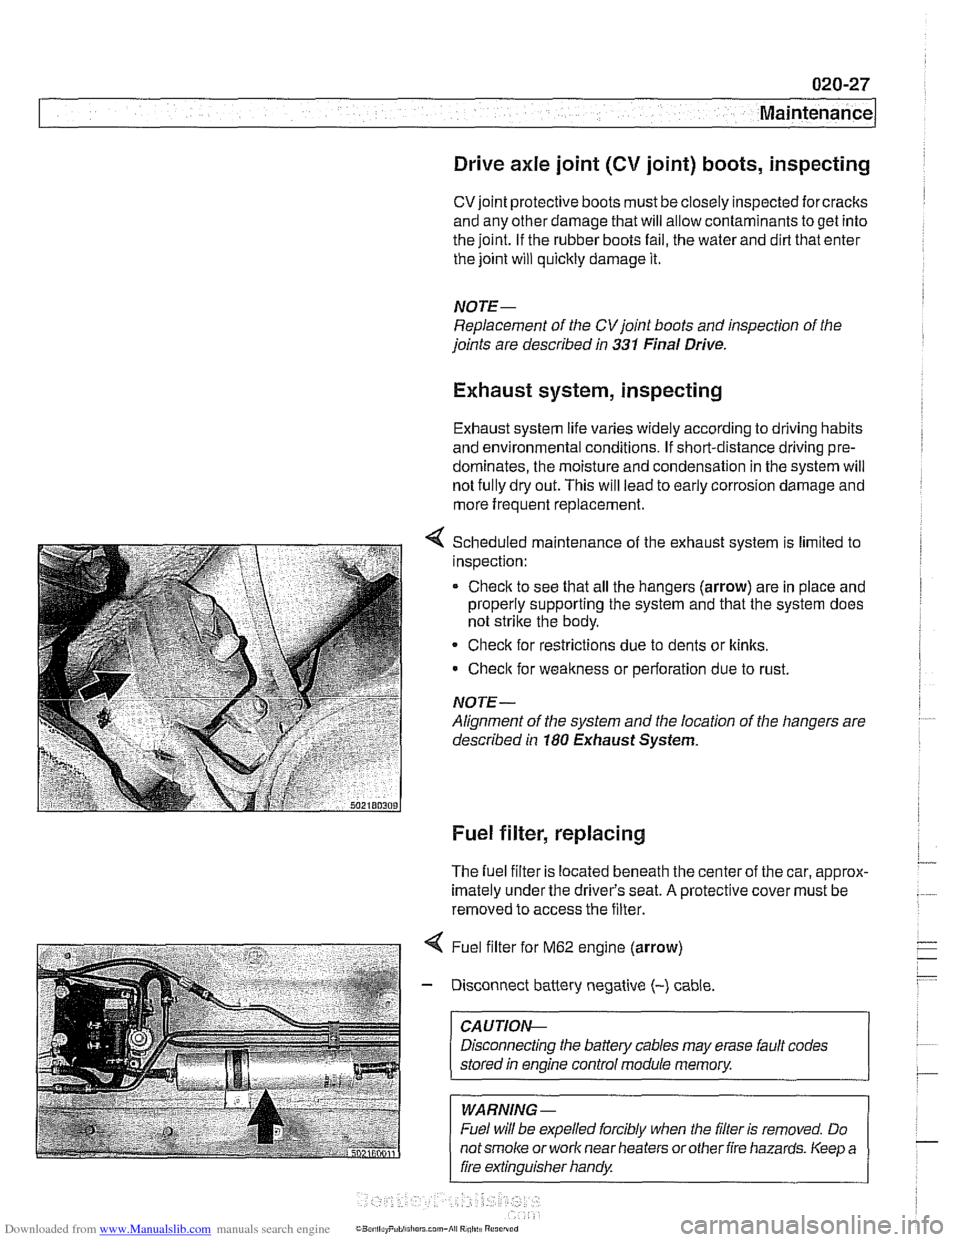 BMW 530i 2001 E39 Workshop Manual Downloaded from www.Manualslib.com manuals search engine 
.-. - 
Maintenance 
Drive axle joint 
(CV joint)  boots, inspecting 
CVjoint protective  boots must be closely inspected  forcracks 
and any o